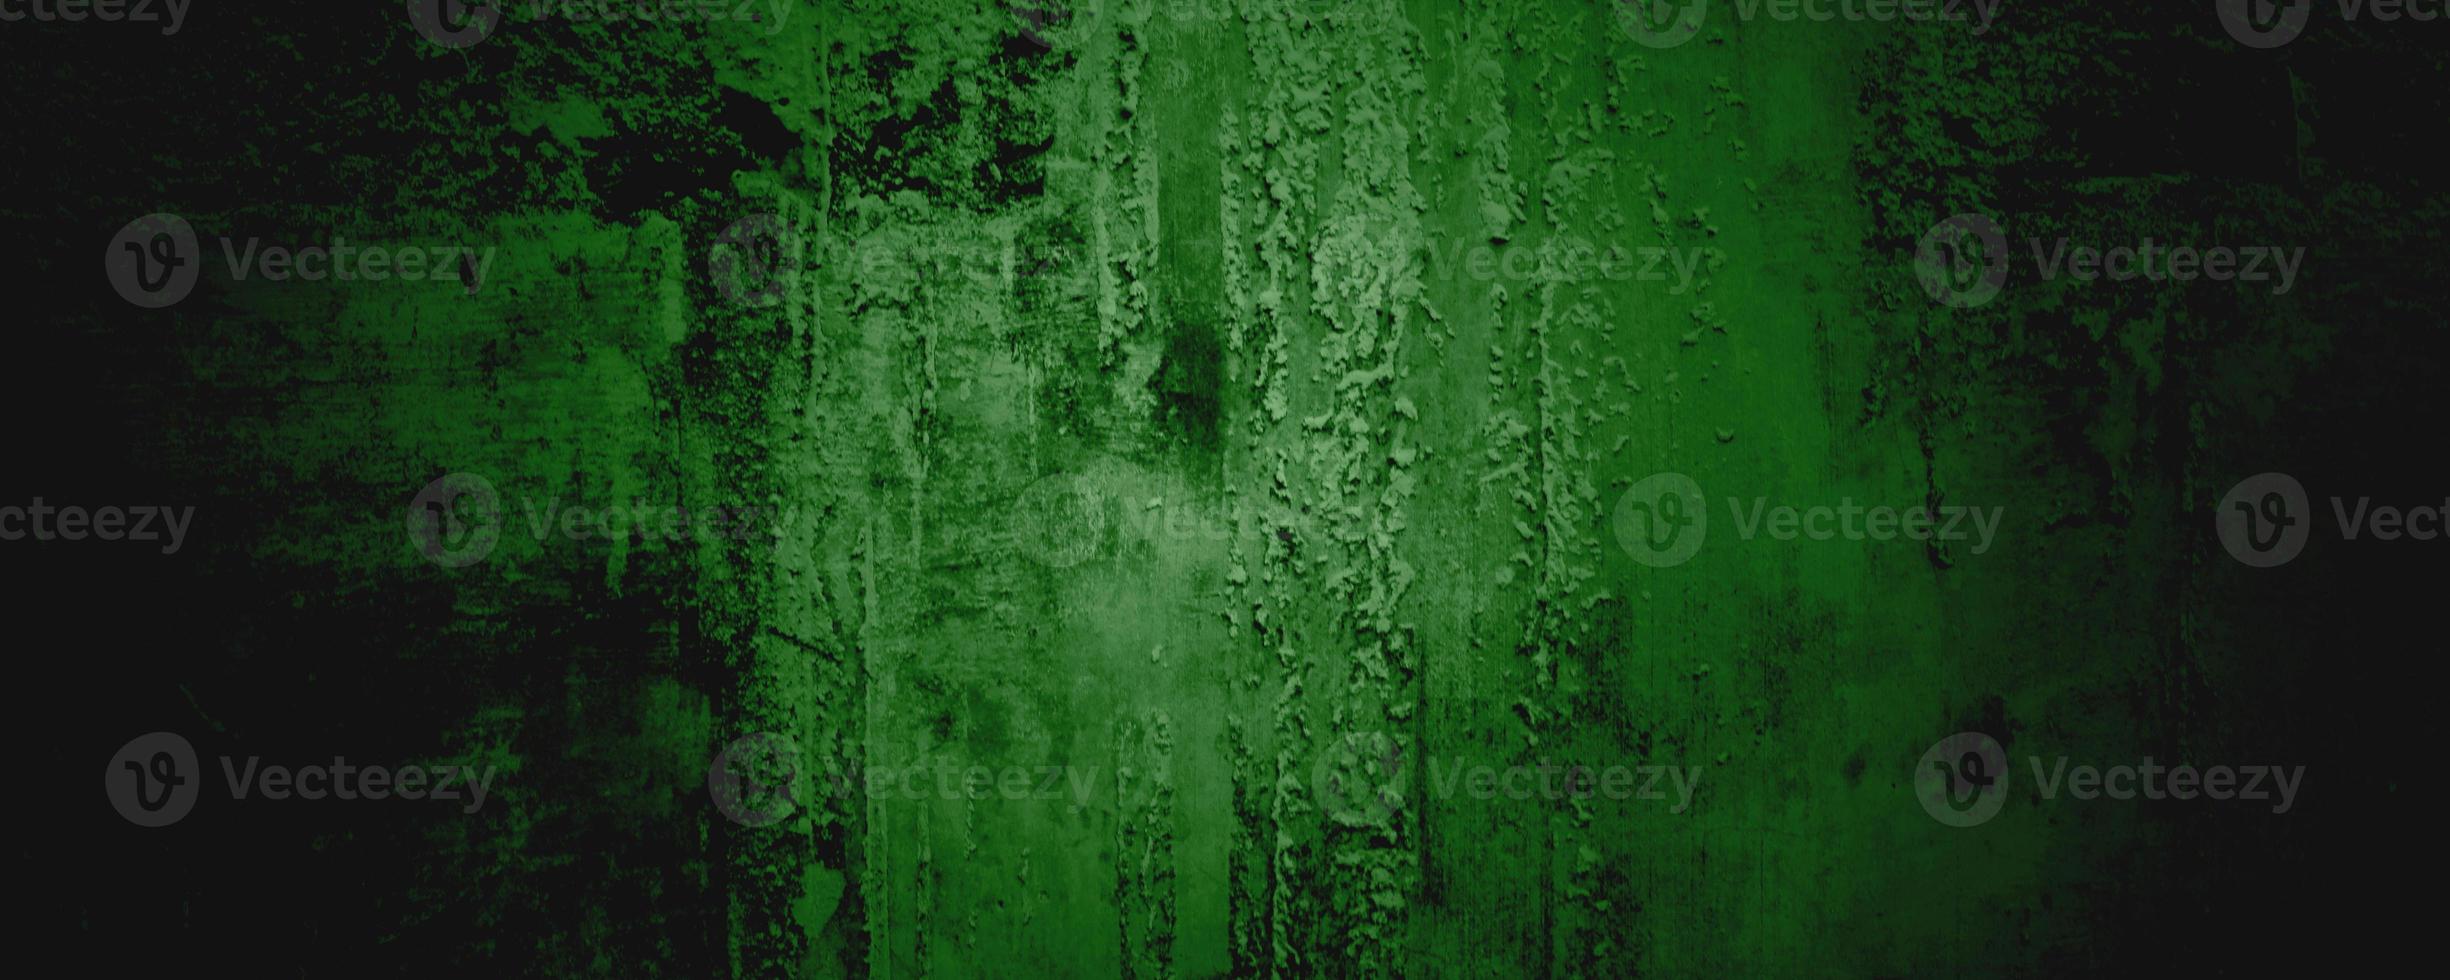 Green Wall Texture Background. Halloween background scary. green and Black grunge background with scratches photo